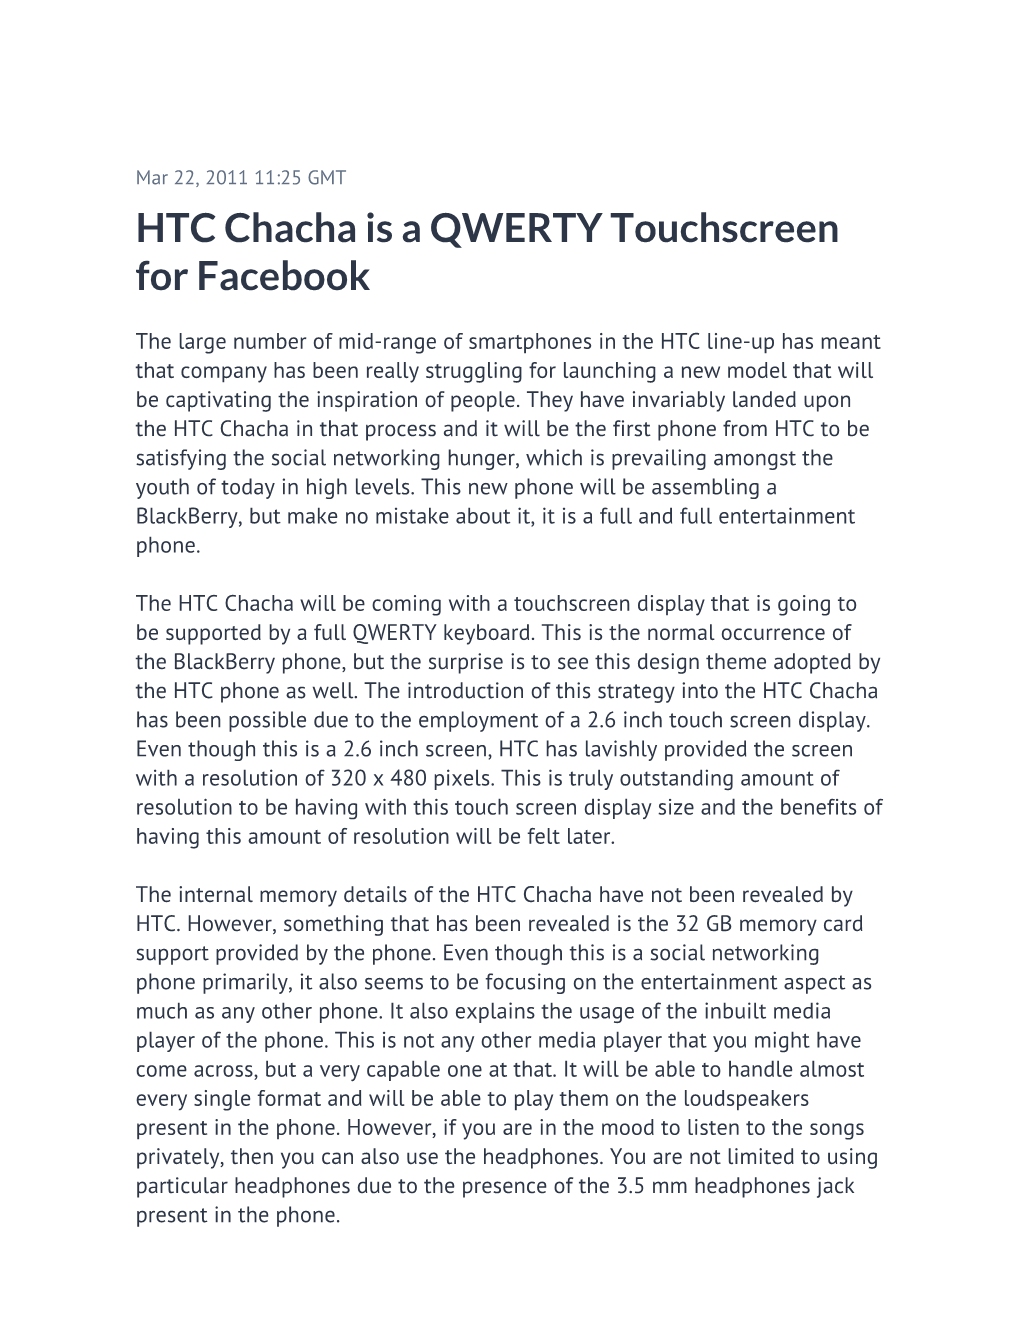 HTC Chacha Is a QWERTY Touchscreen for Facebook